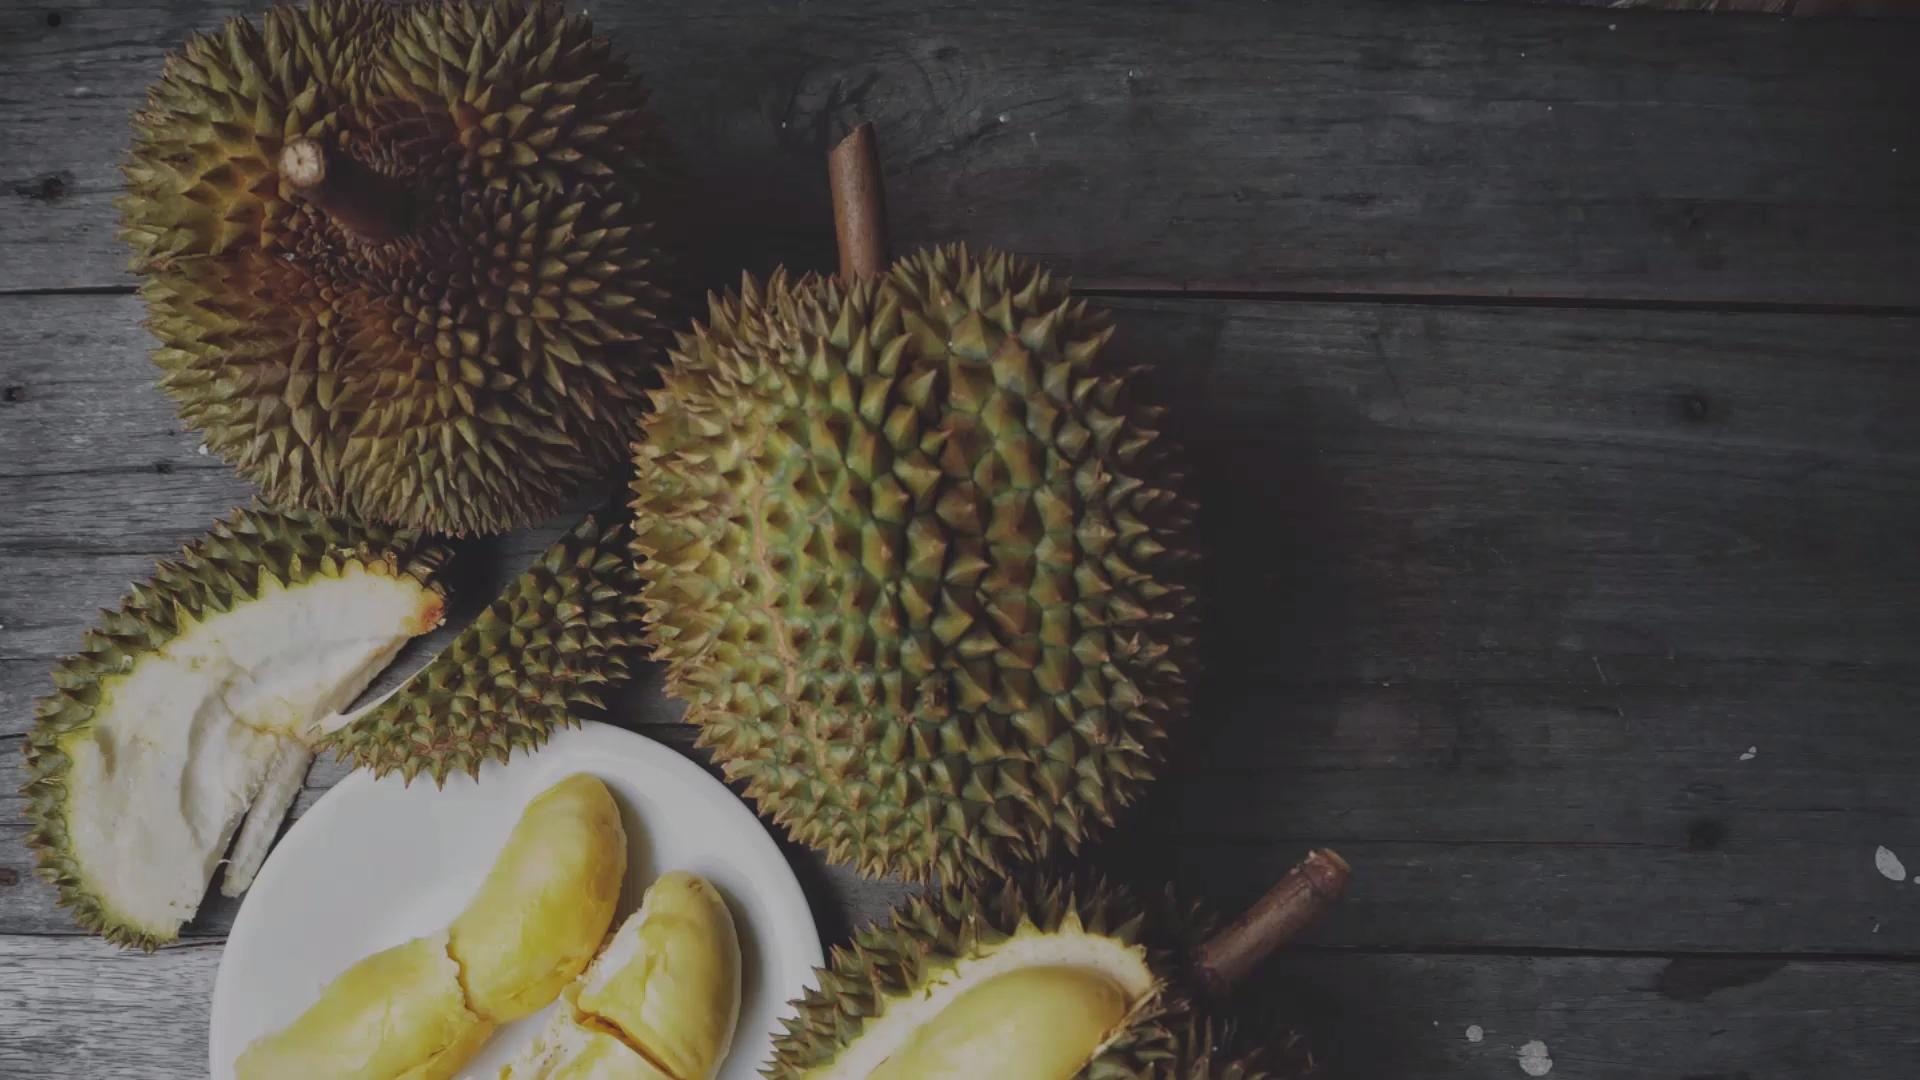 Durian: Fruit contain between two to five large seeds, Terrestrial plant. 1920x1080 Full HD Wallpaper.